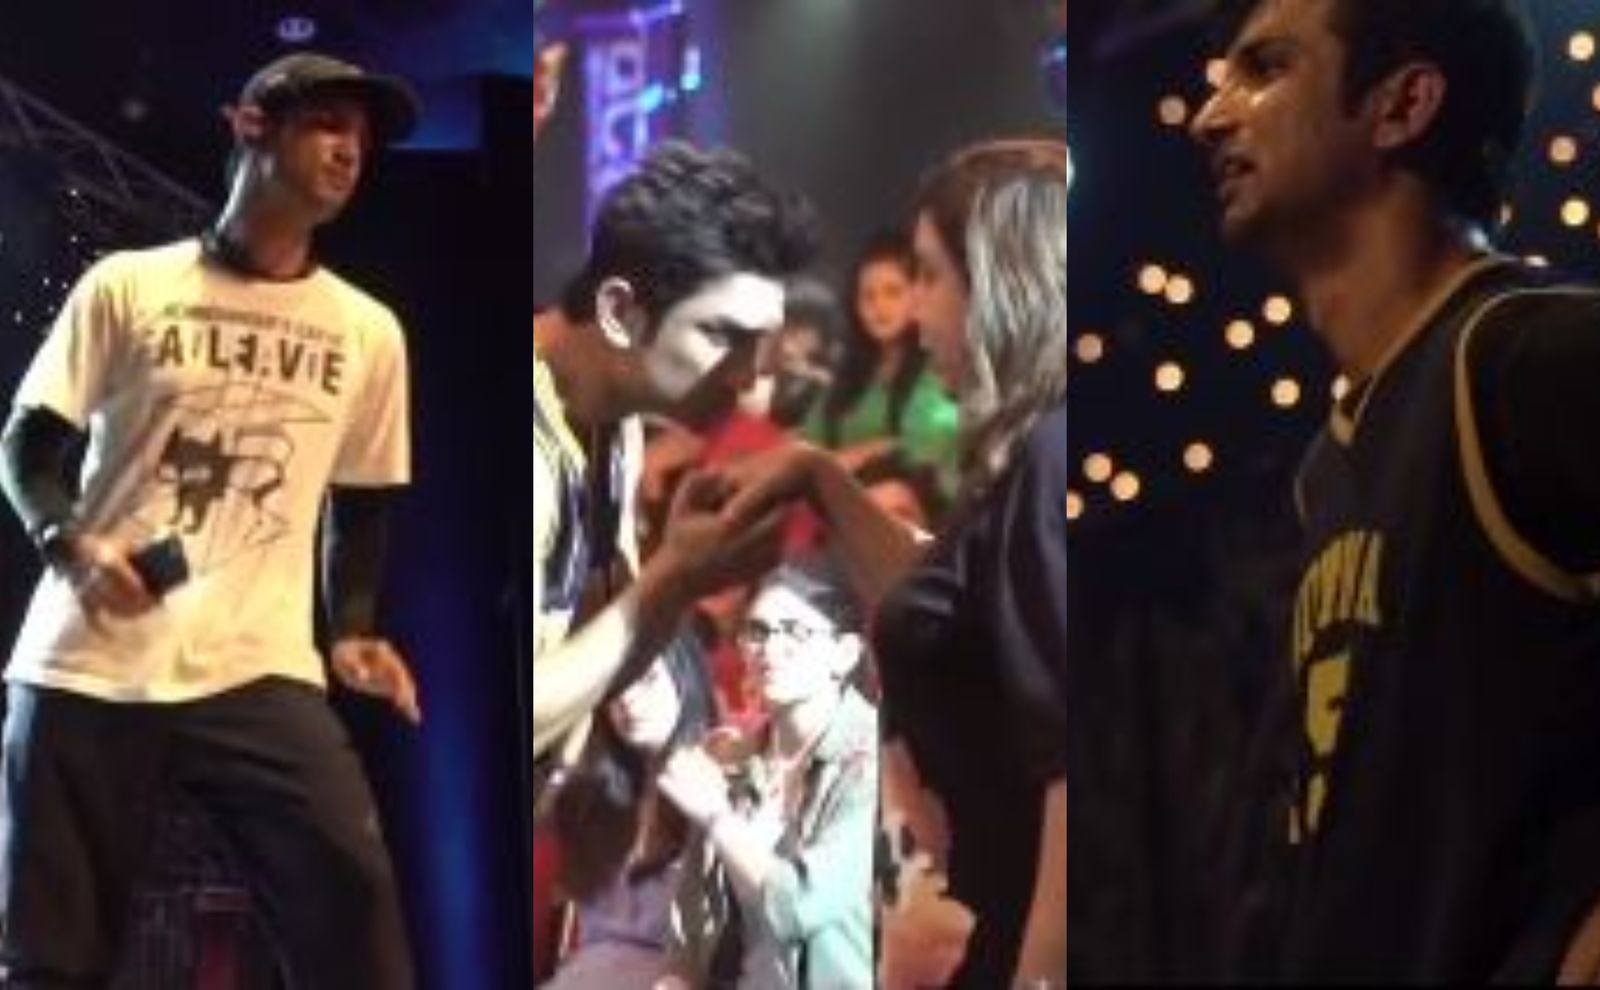 Dil Bechara: Sanjana Sanghi Says Sushant Singh Rajput's Dancing Was 'Absolute Poetry In Motion', Share Video Of Him Practicing